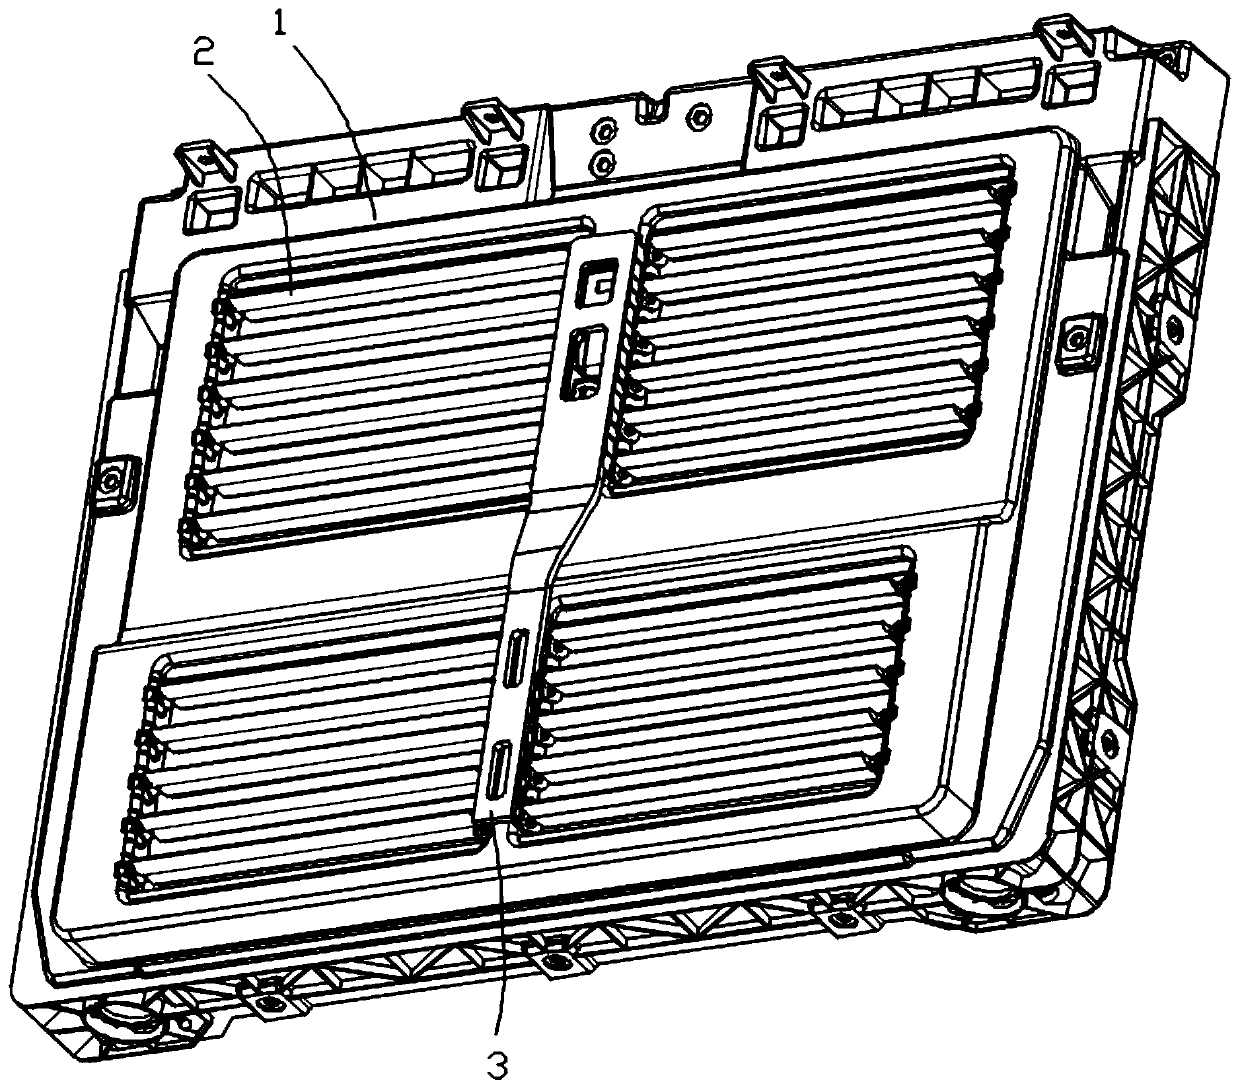 Integrated active air inlet grille front end frame